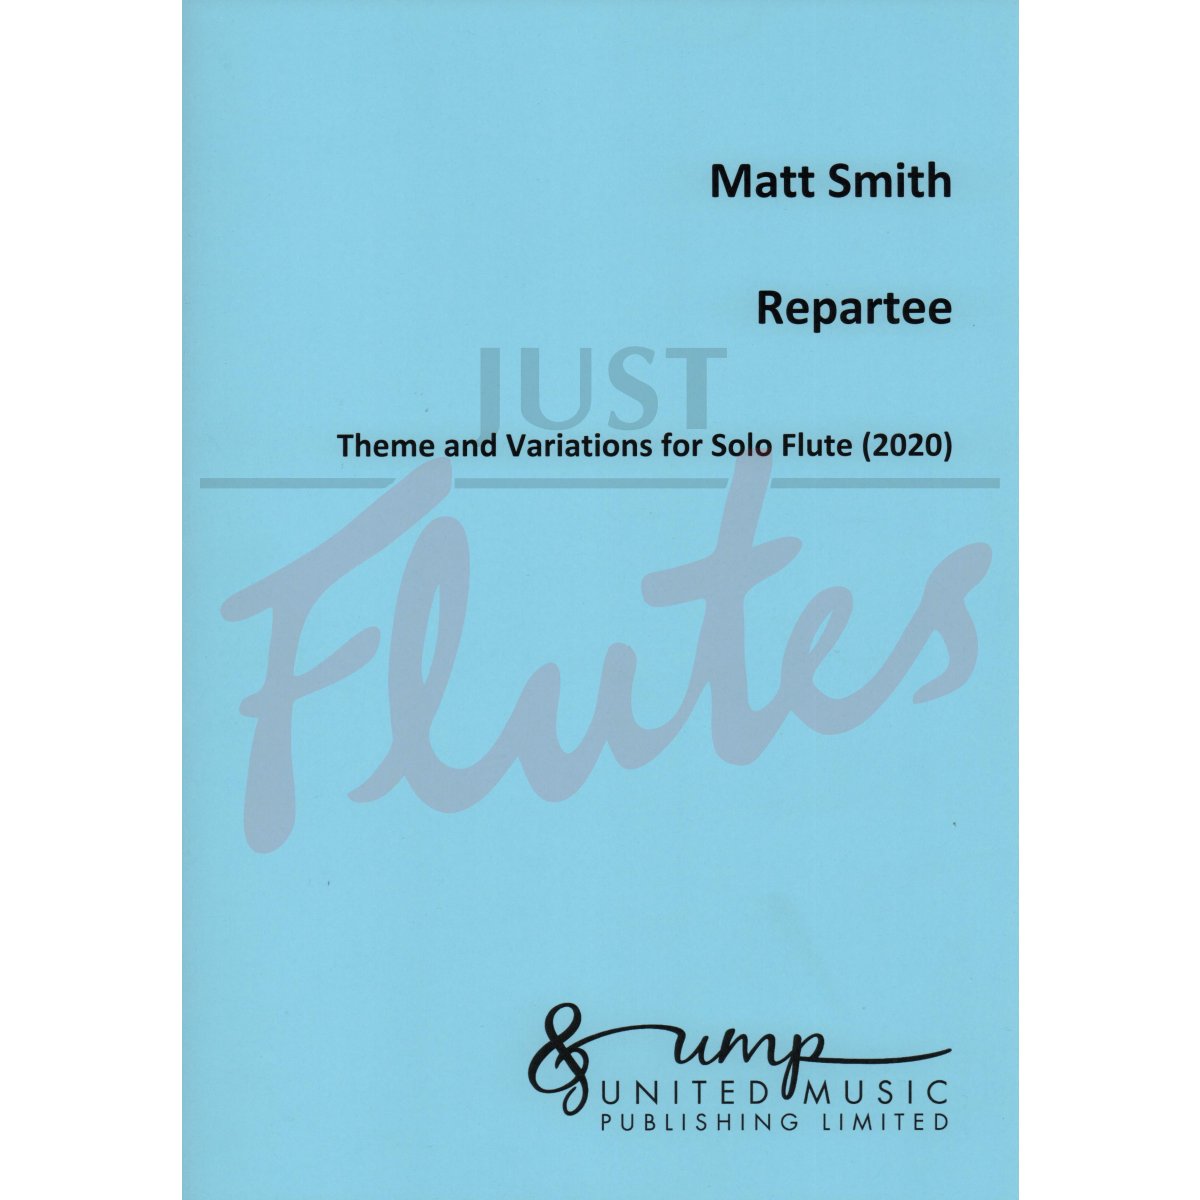 Repartee: Theme and Variations for Solo Flute